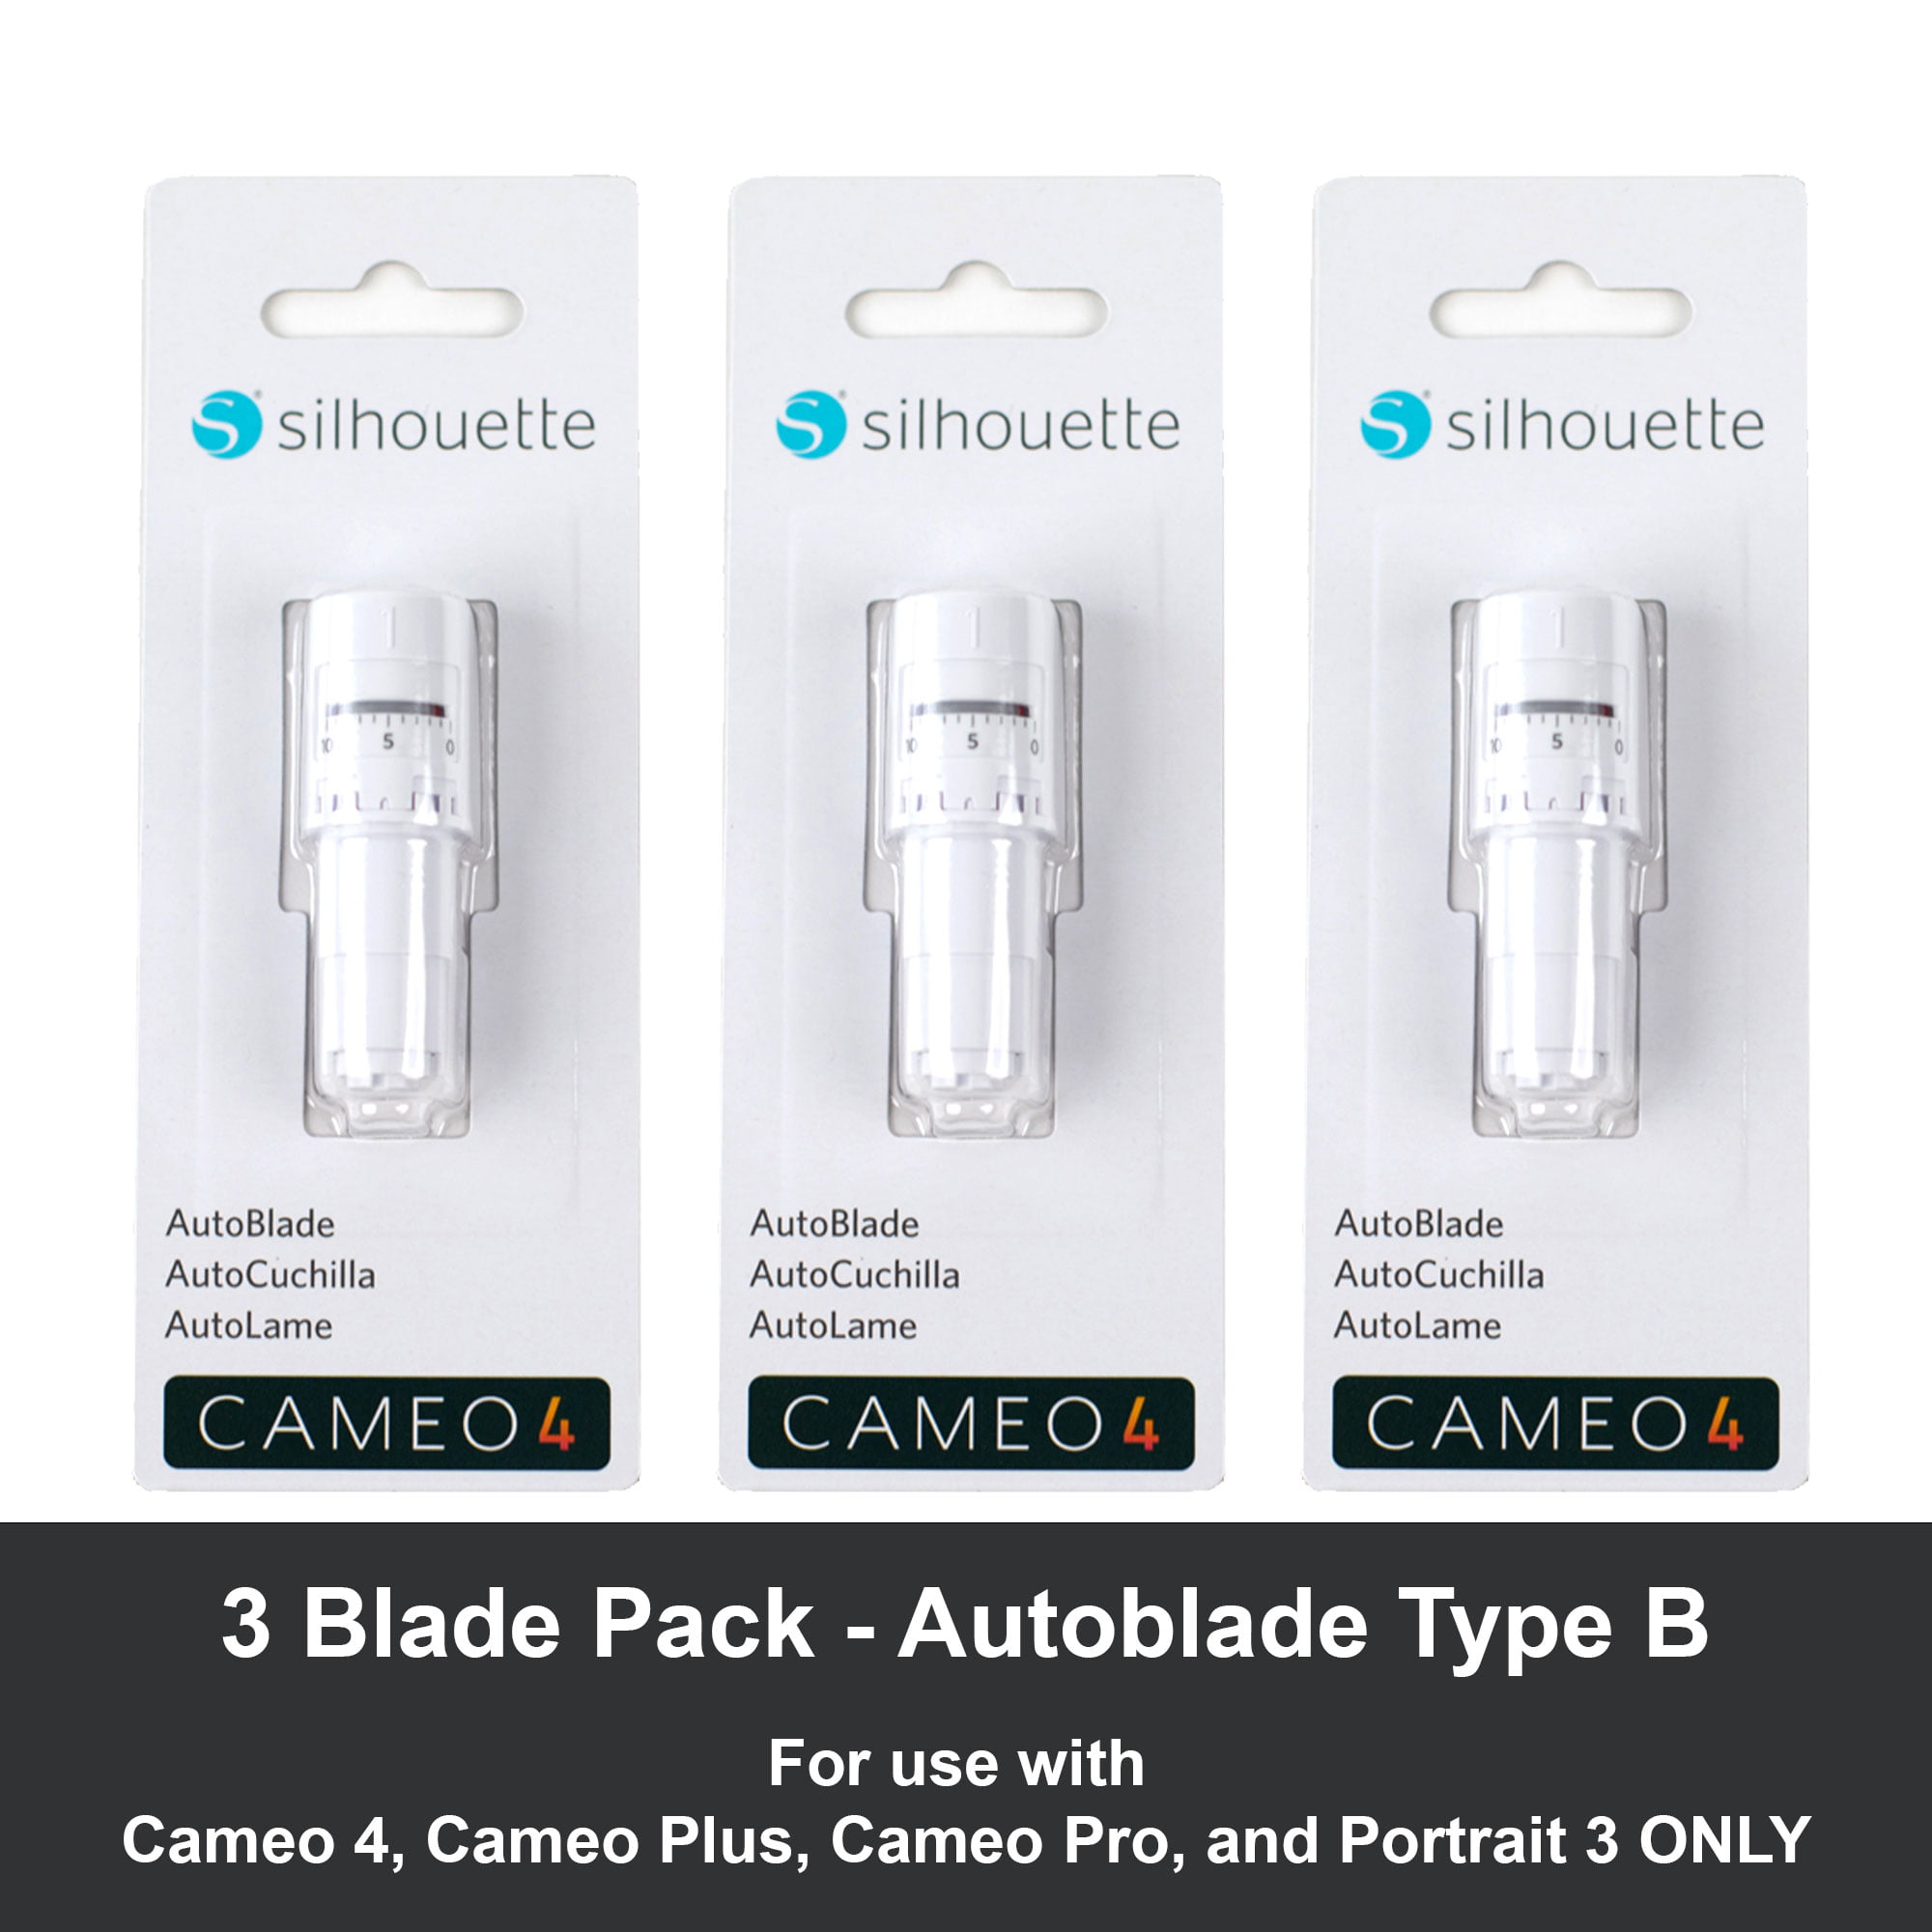 Silhouette Auto Blade (2ND Gen) Only for Cameo 4 - China Cameo 4, Blade